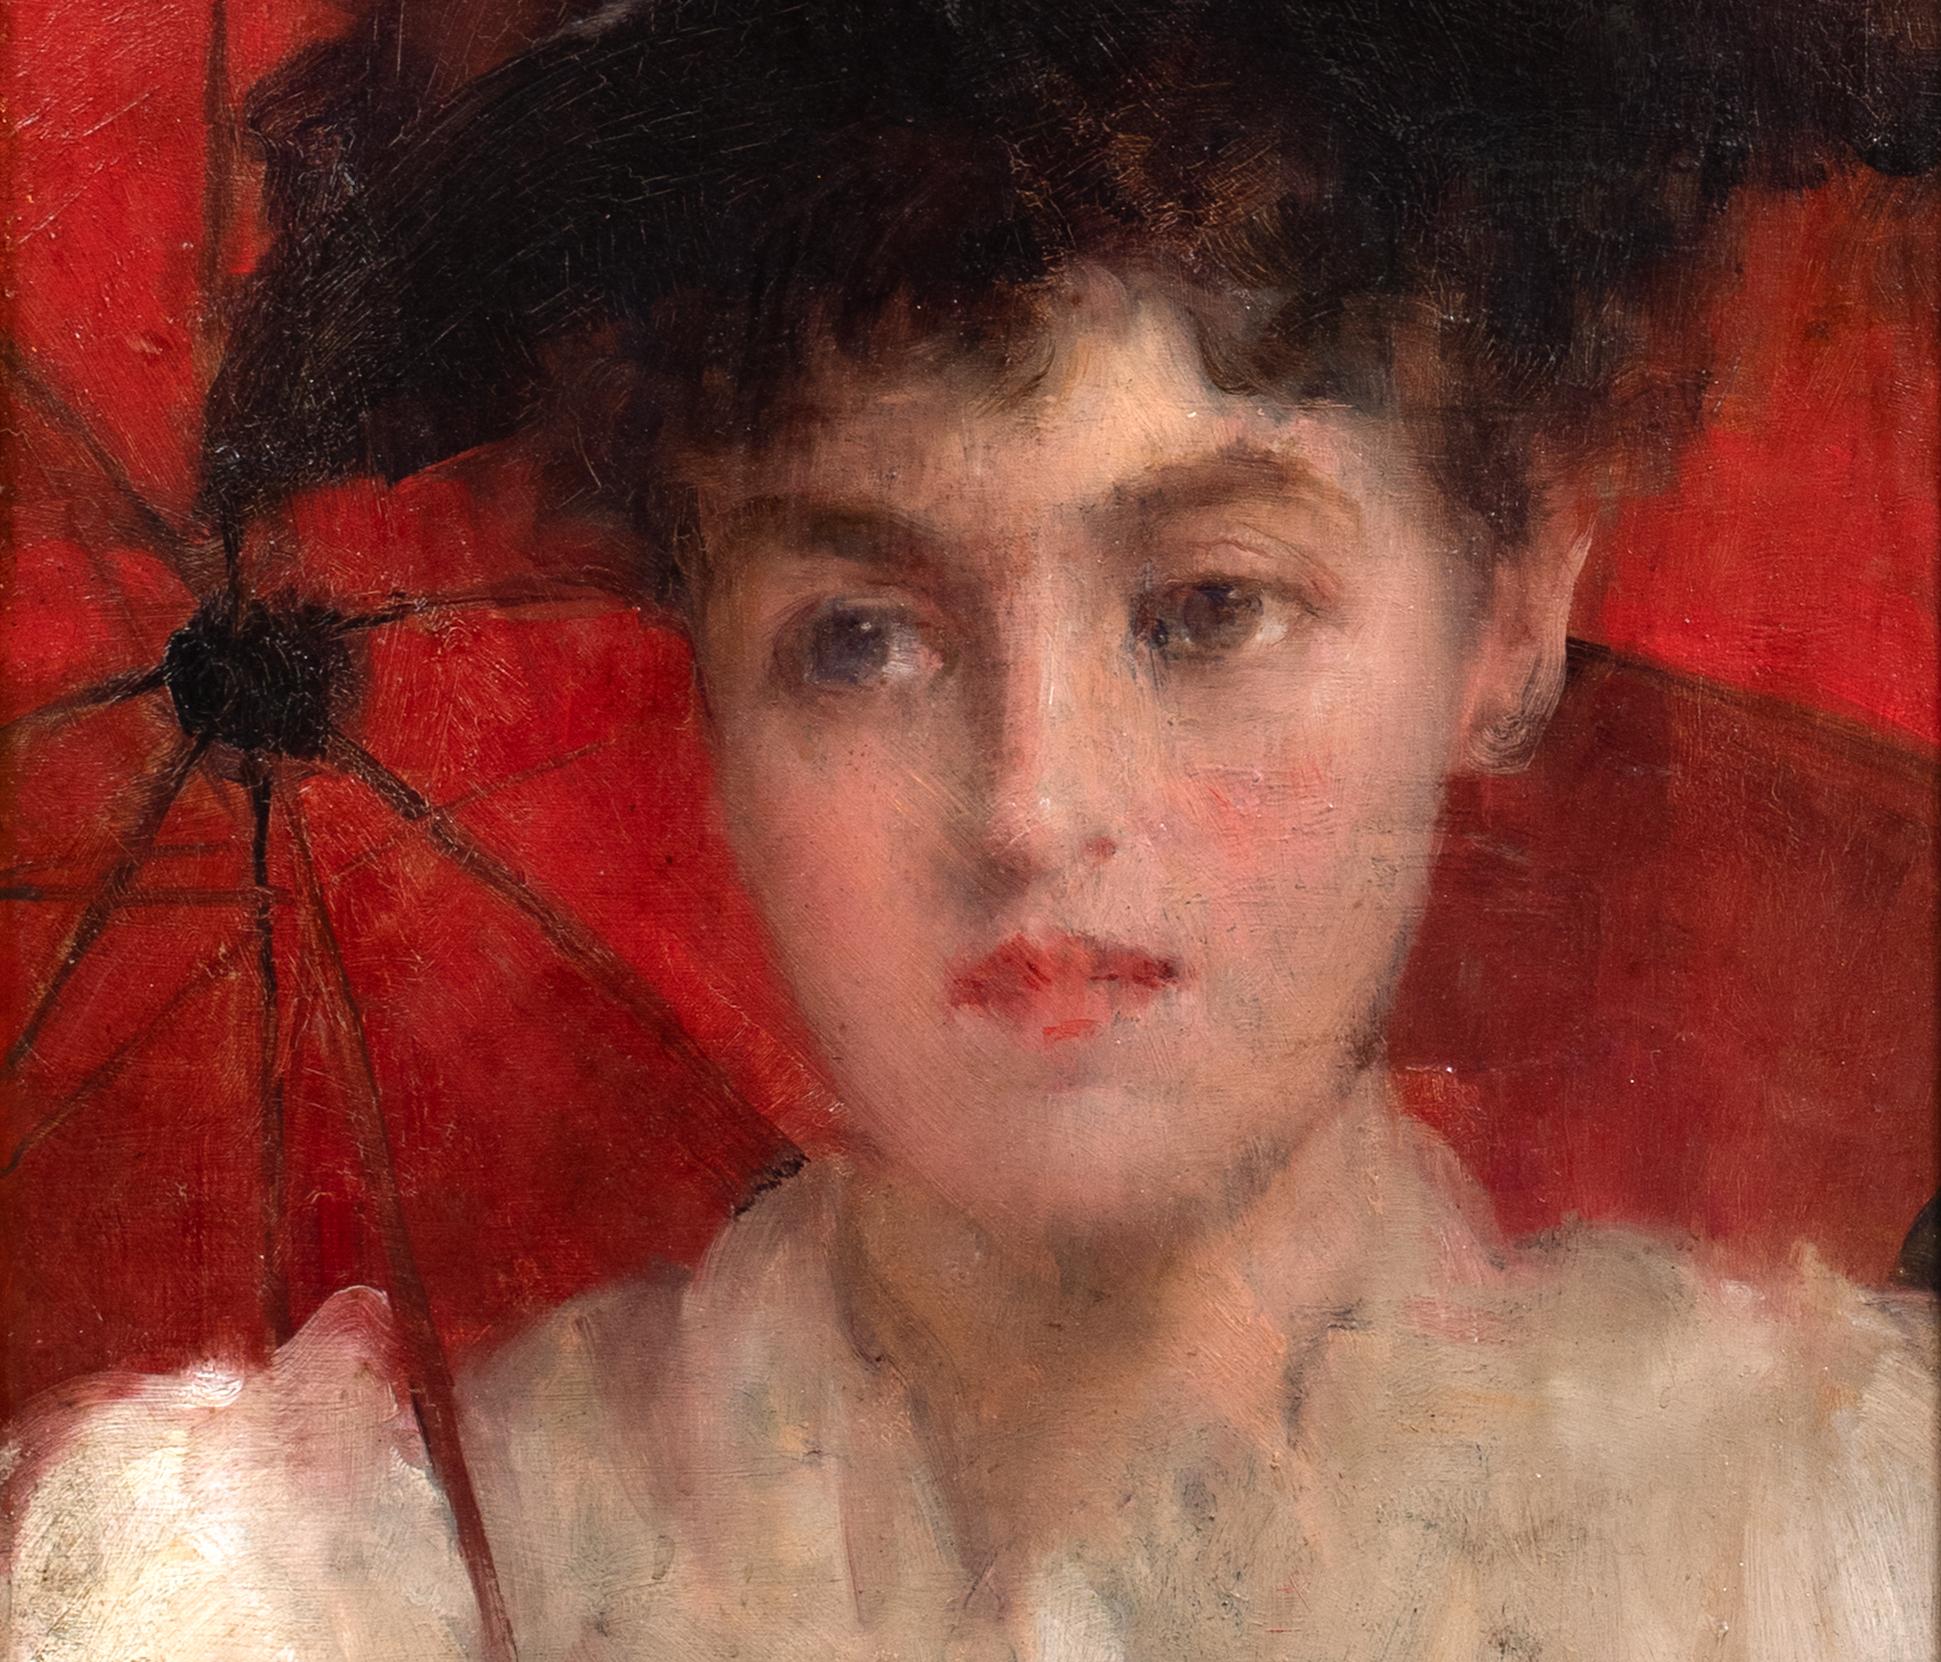 Portrait Of A Lady With A Red Parasol, circa 1900  by Robert Edward MORRISON  For Sale 3